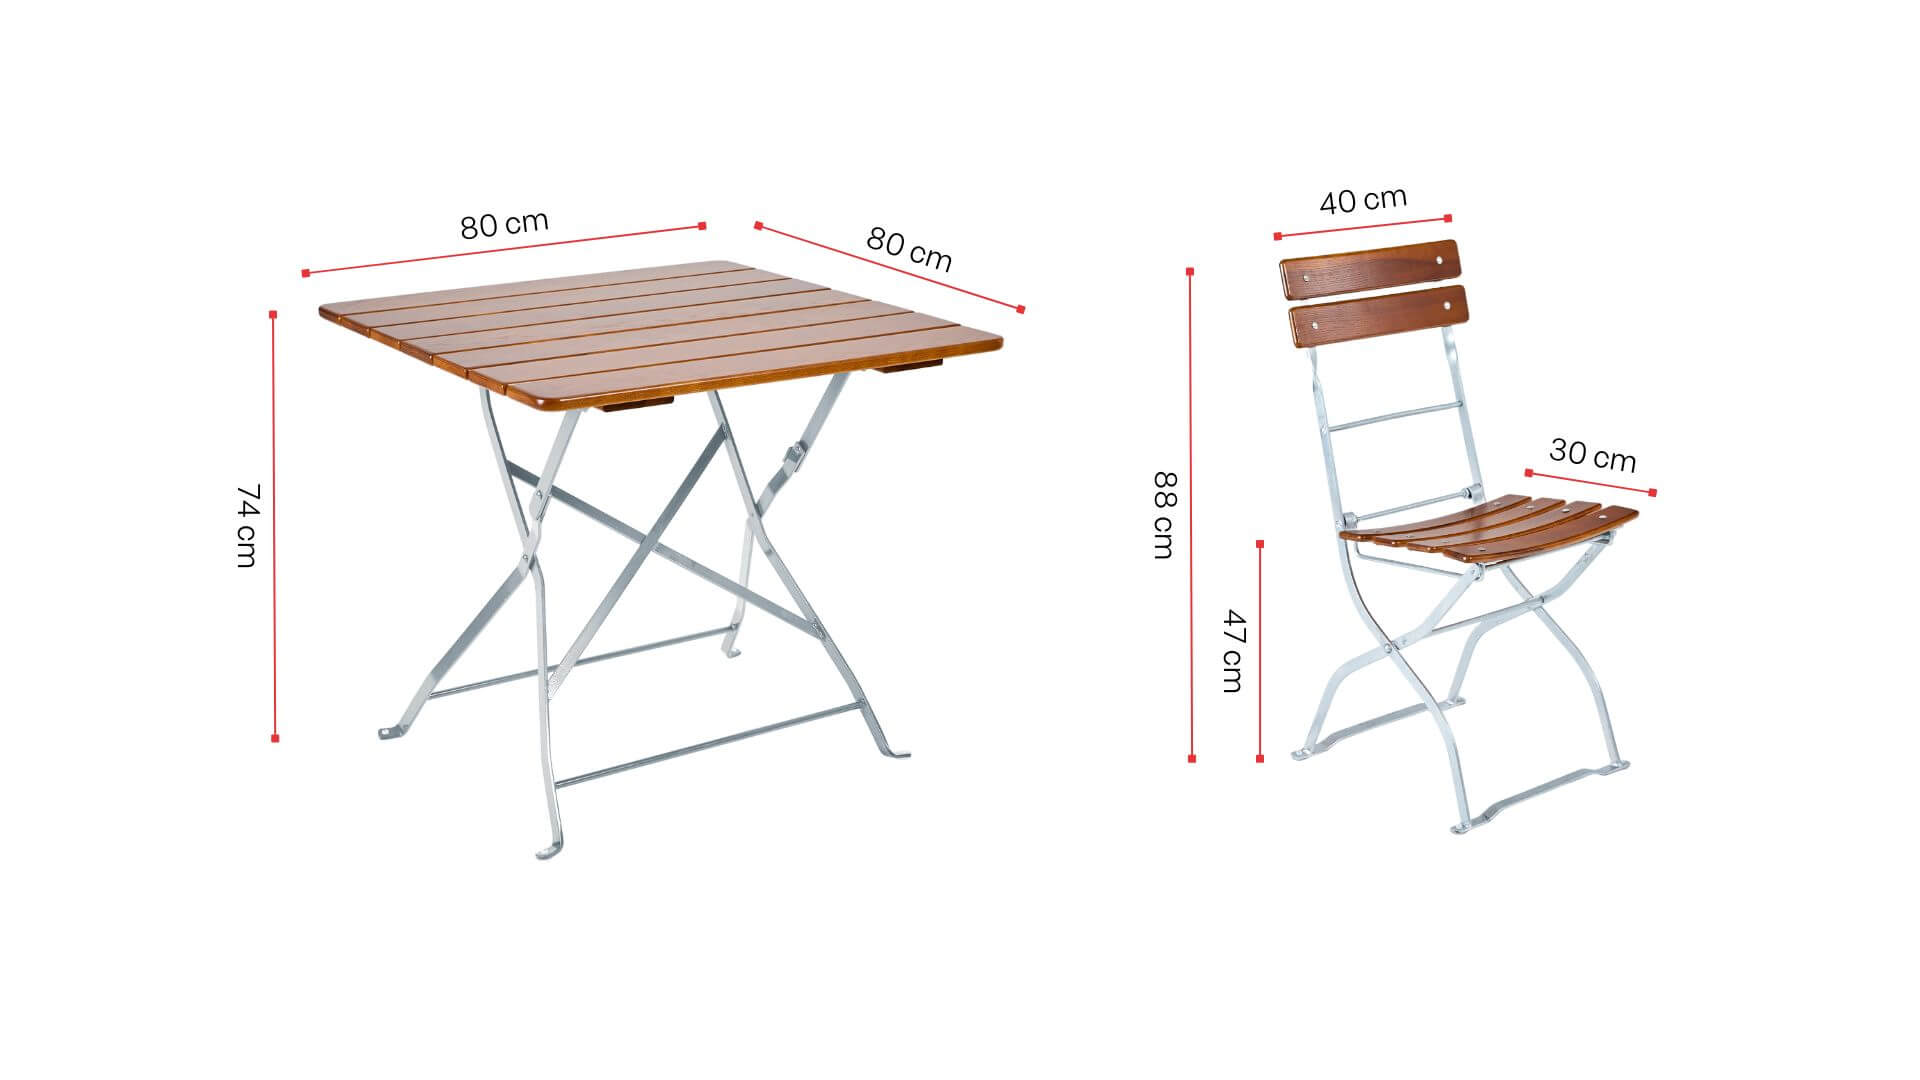 The dimensions of the square beer garden table and beer garden chair are shown.